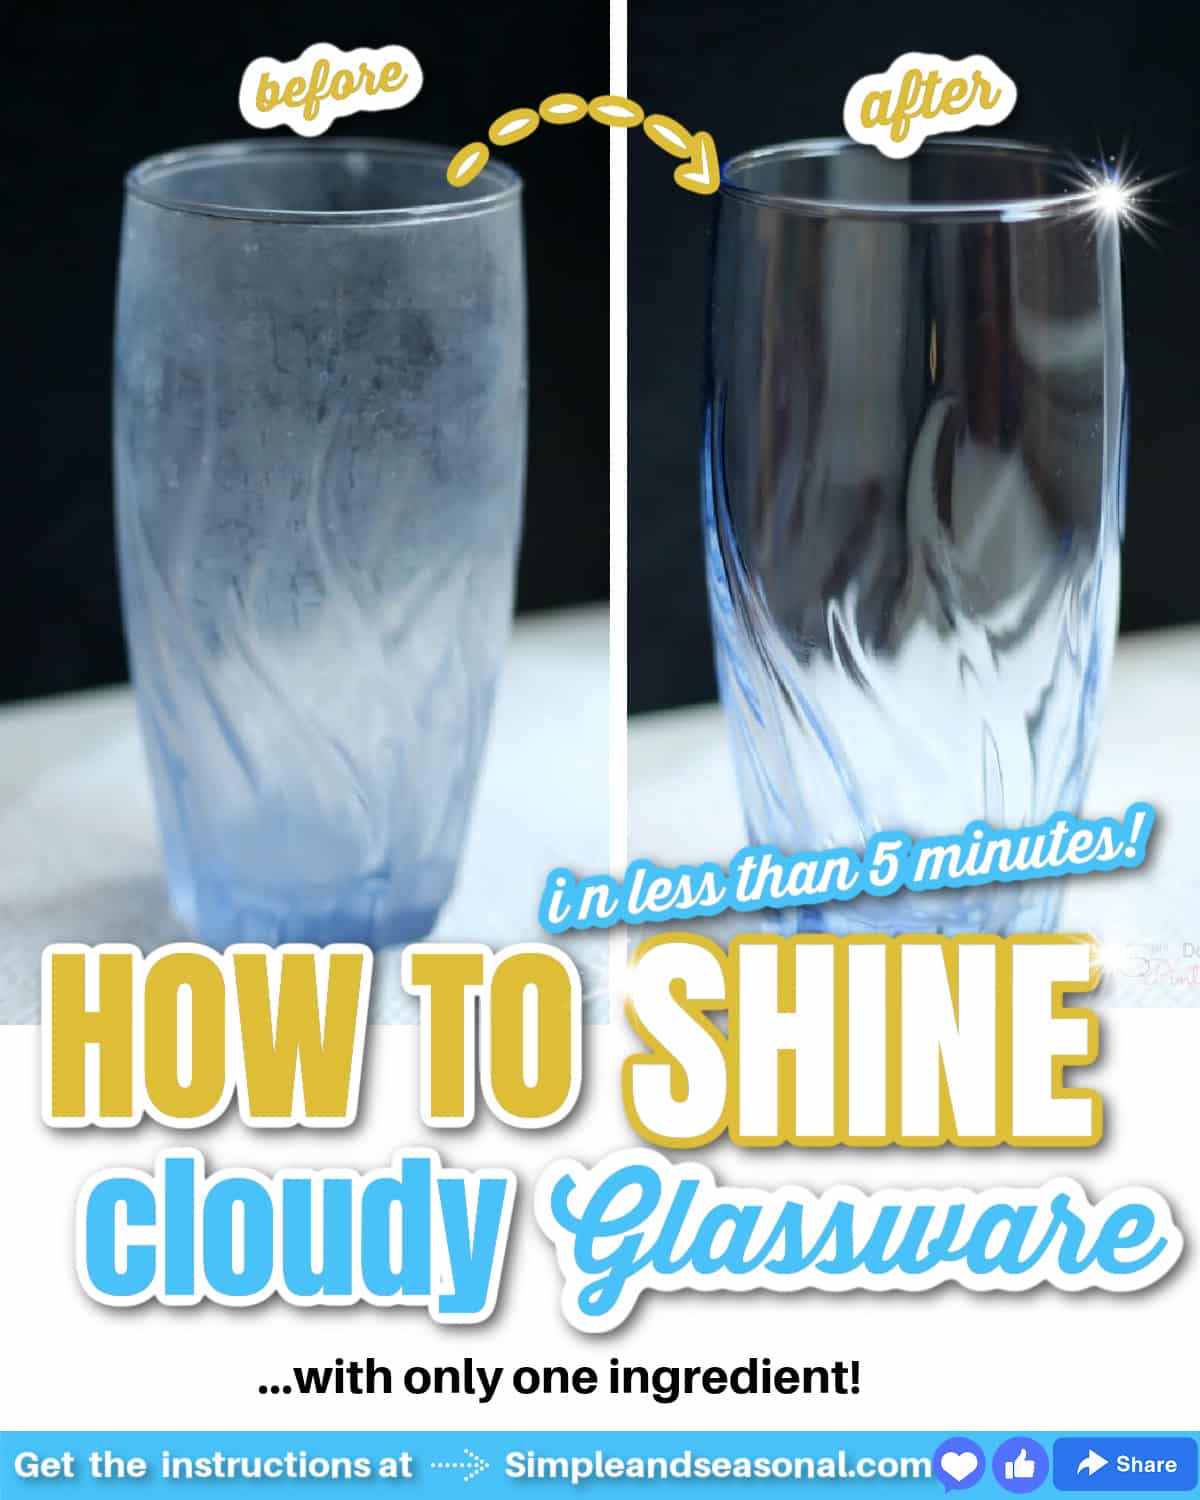 How To Clean Crystal Glasses